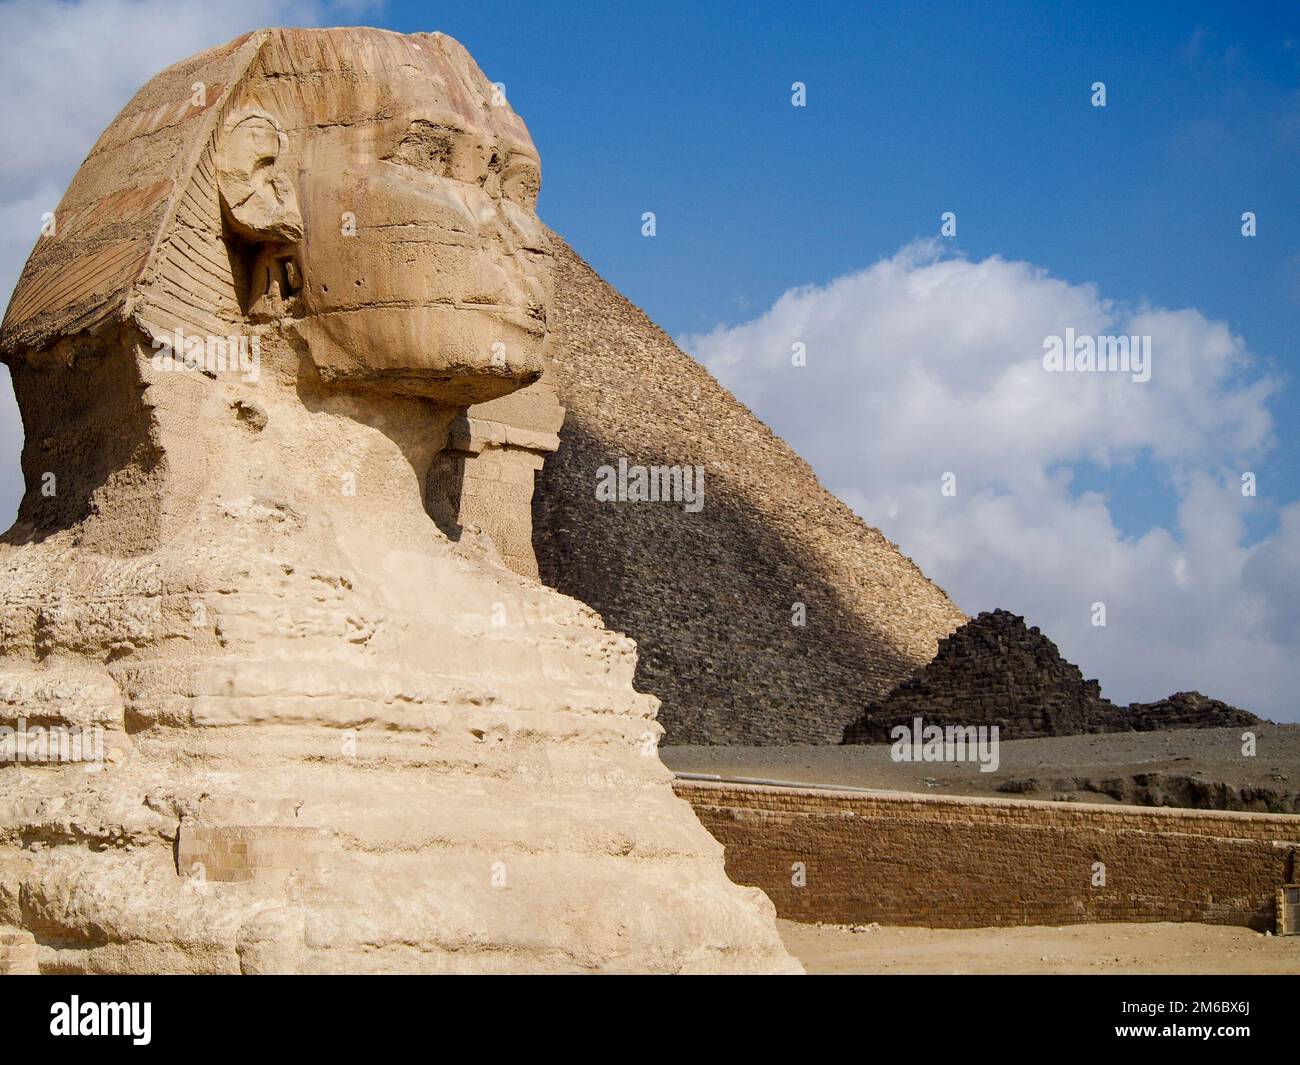 Ancient Sphinx Monument at Pyramids of Giza Stock Photo - Alamy